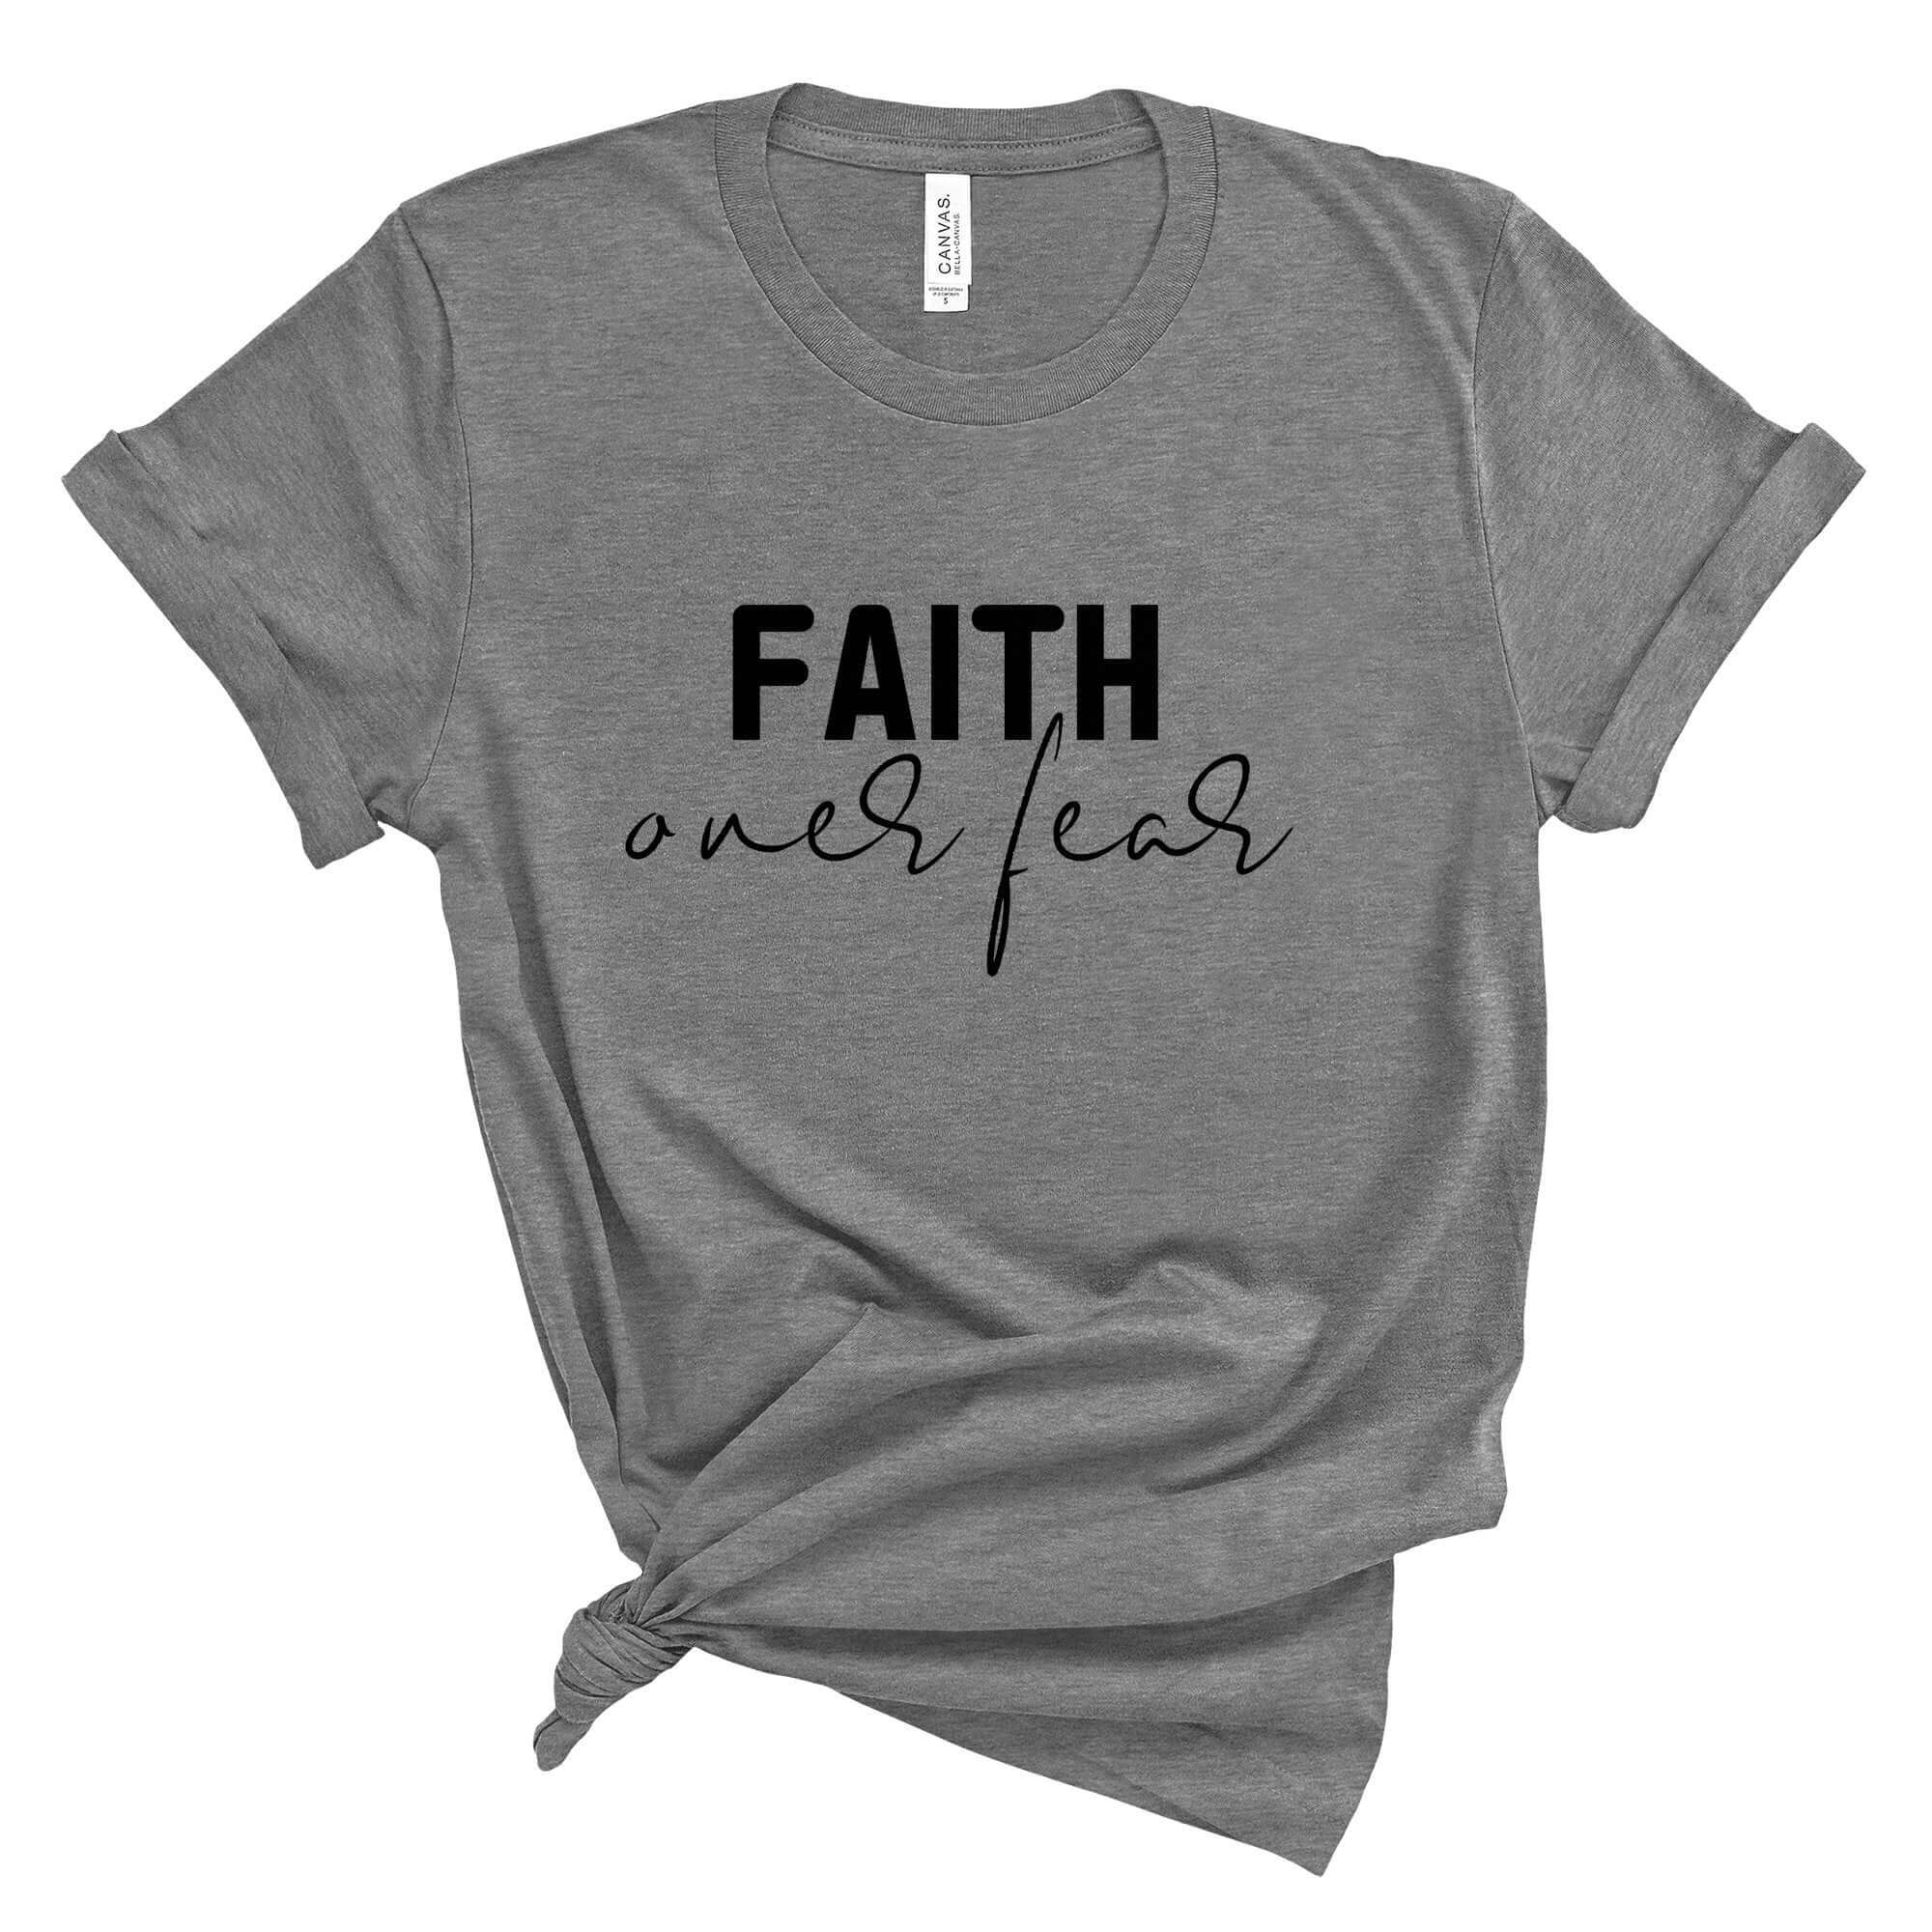 Faith Over Fear Women's Short Sleeve TeeEmbrace a message of positivity and boldness with this stylish "Faith Over Fear" T-shirt. Crafted for comfort and durability, this tee features a minimalist design with the inspiring phrase "Faith over fear" in an e